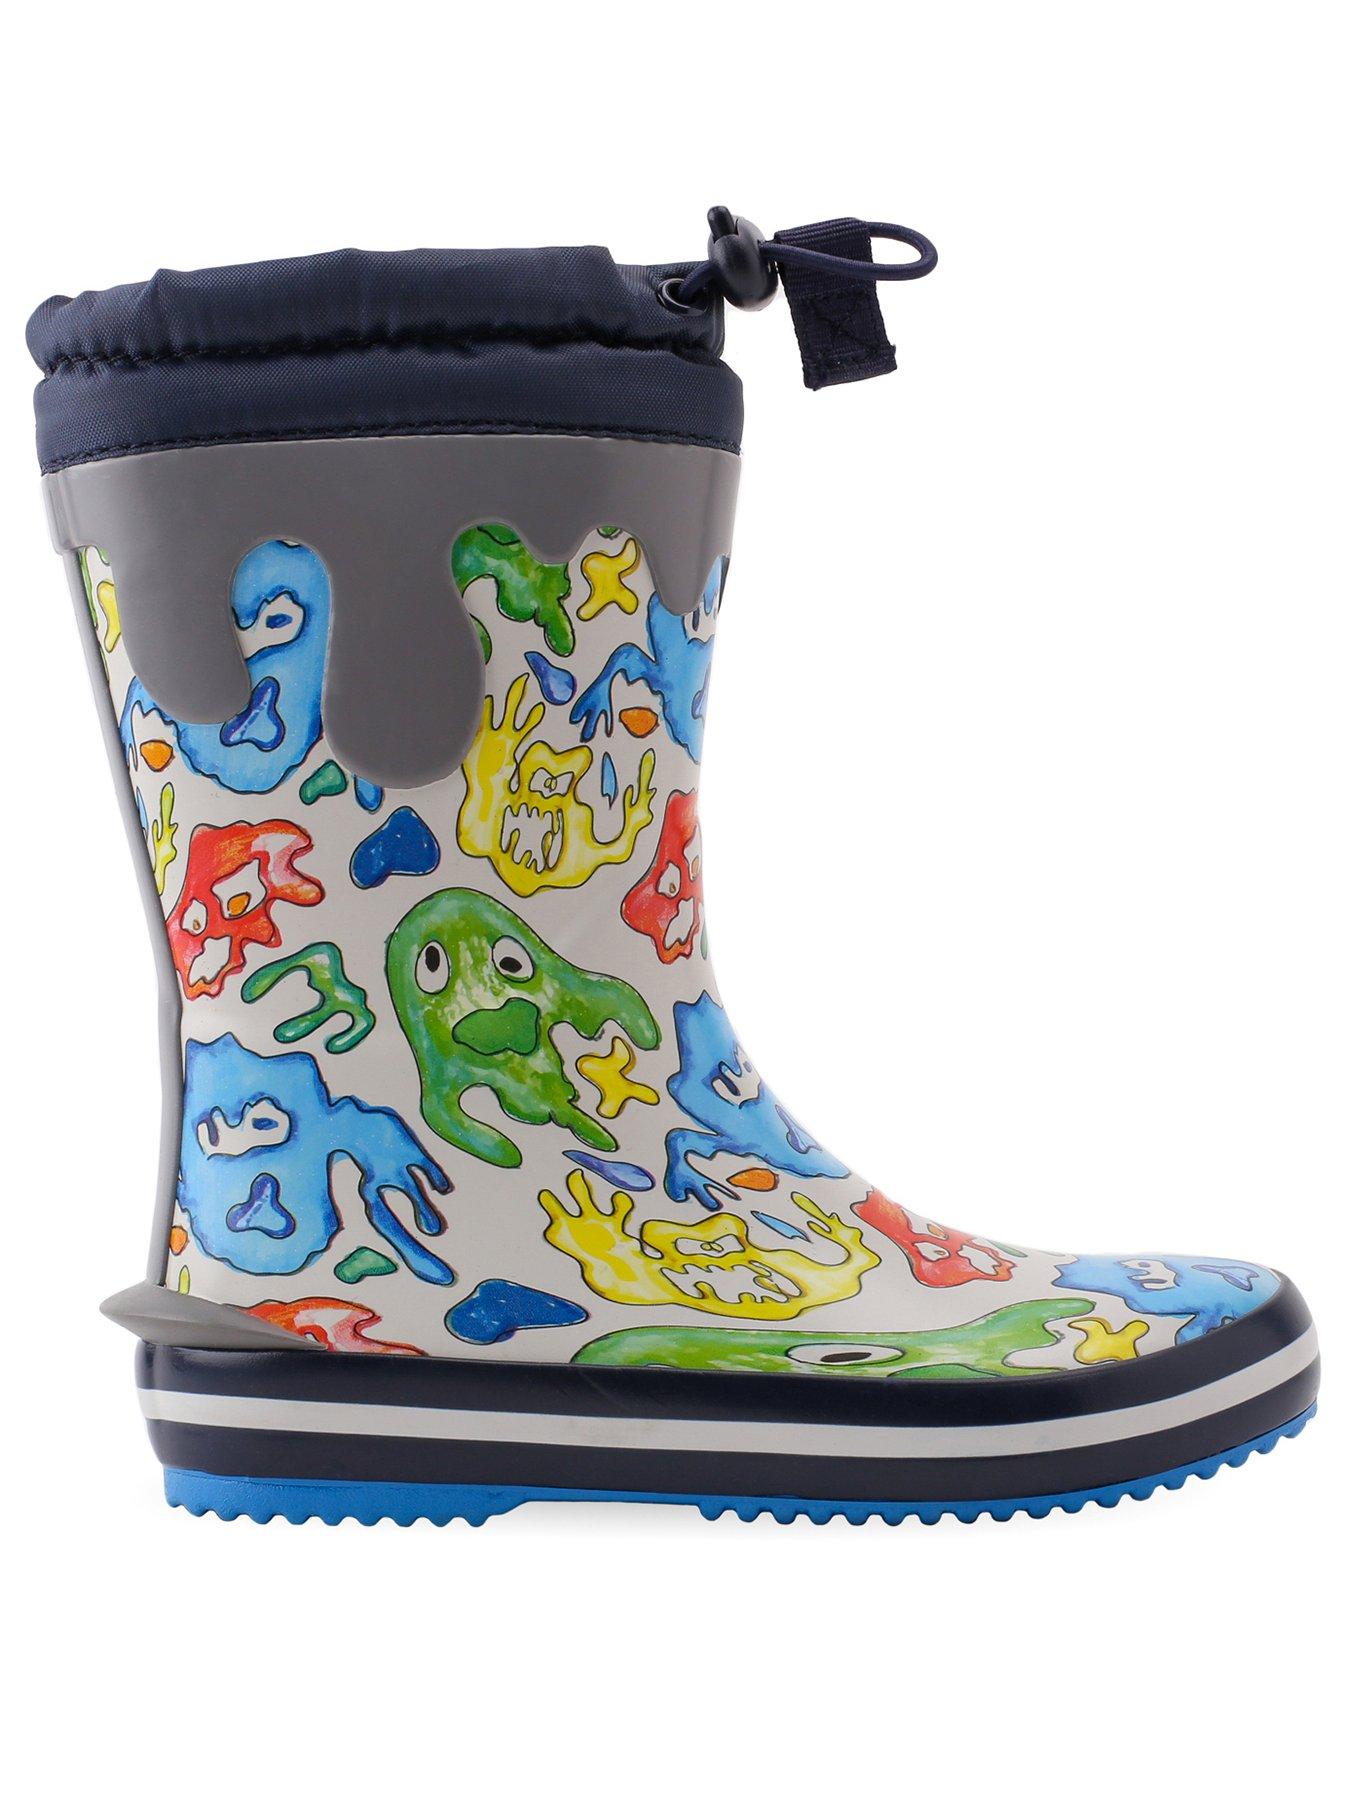 Shoes & boots Big Puddle Slime Waterproof Wellies - Grey Multi